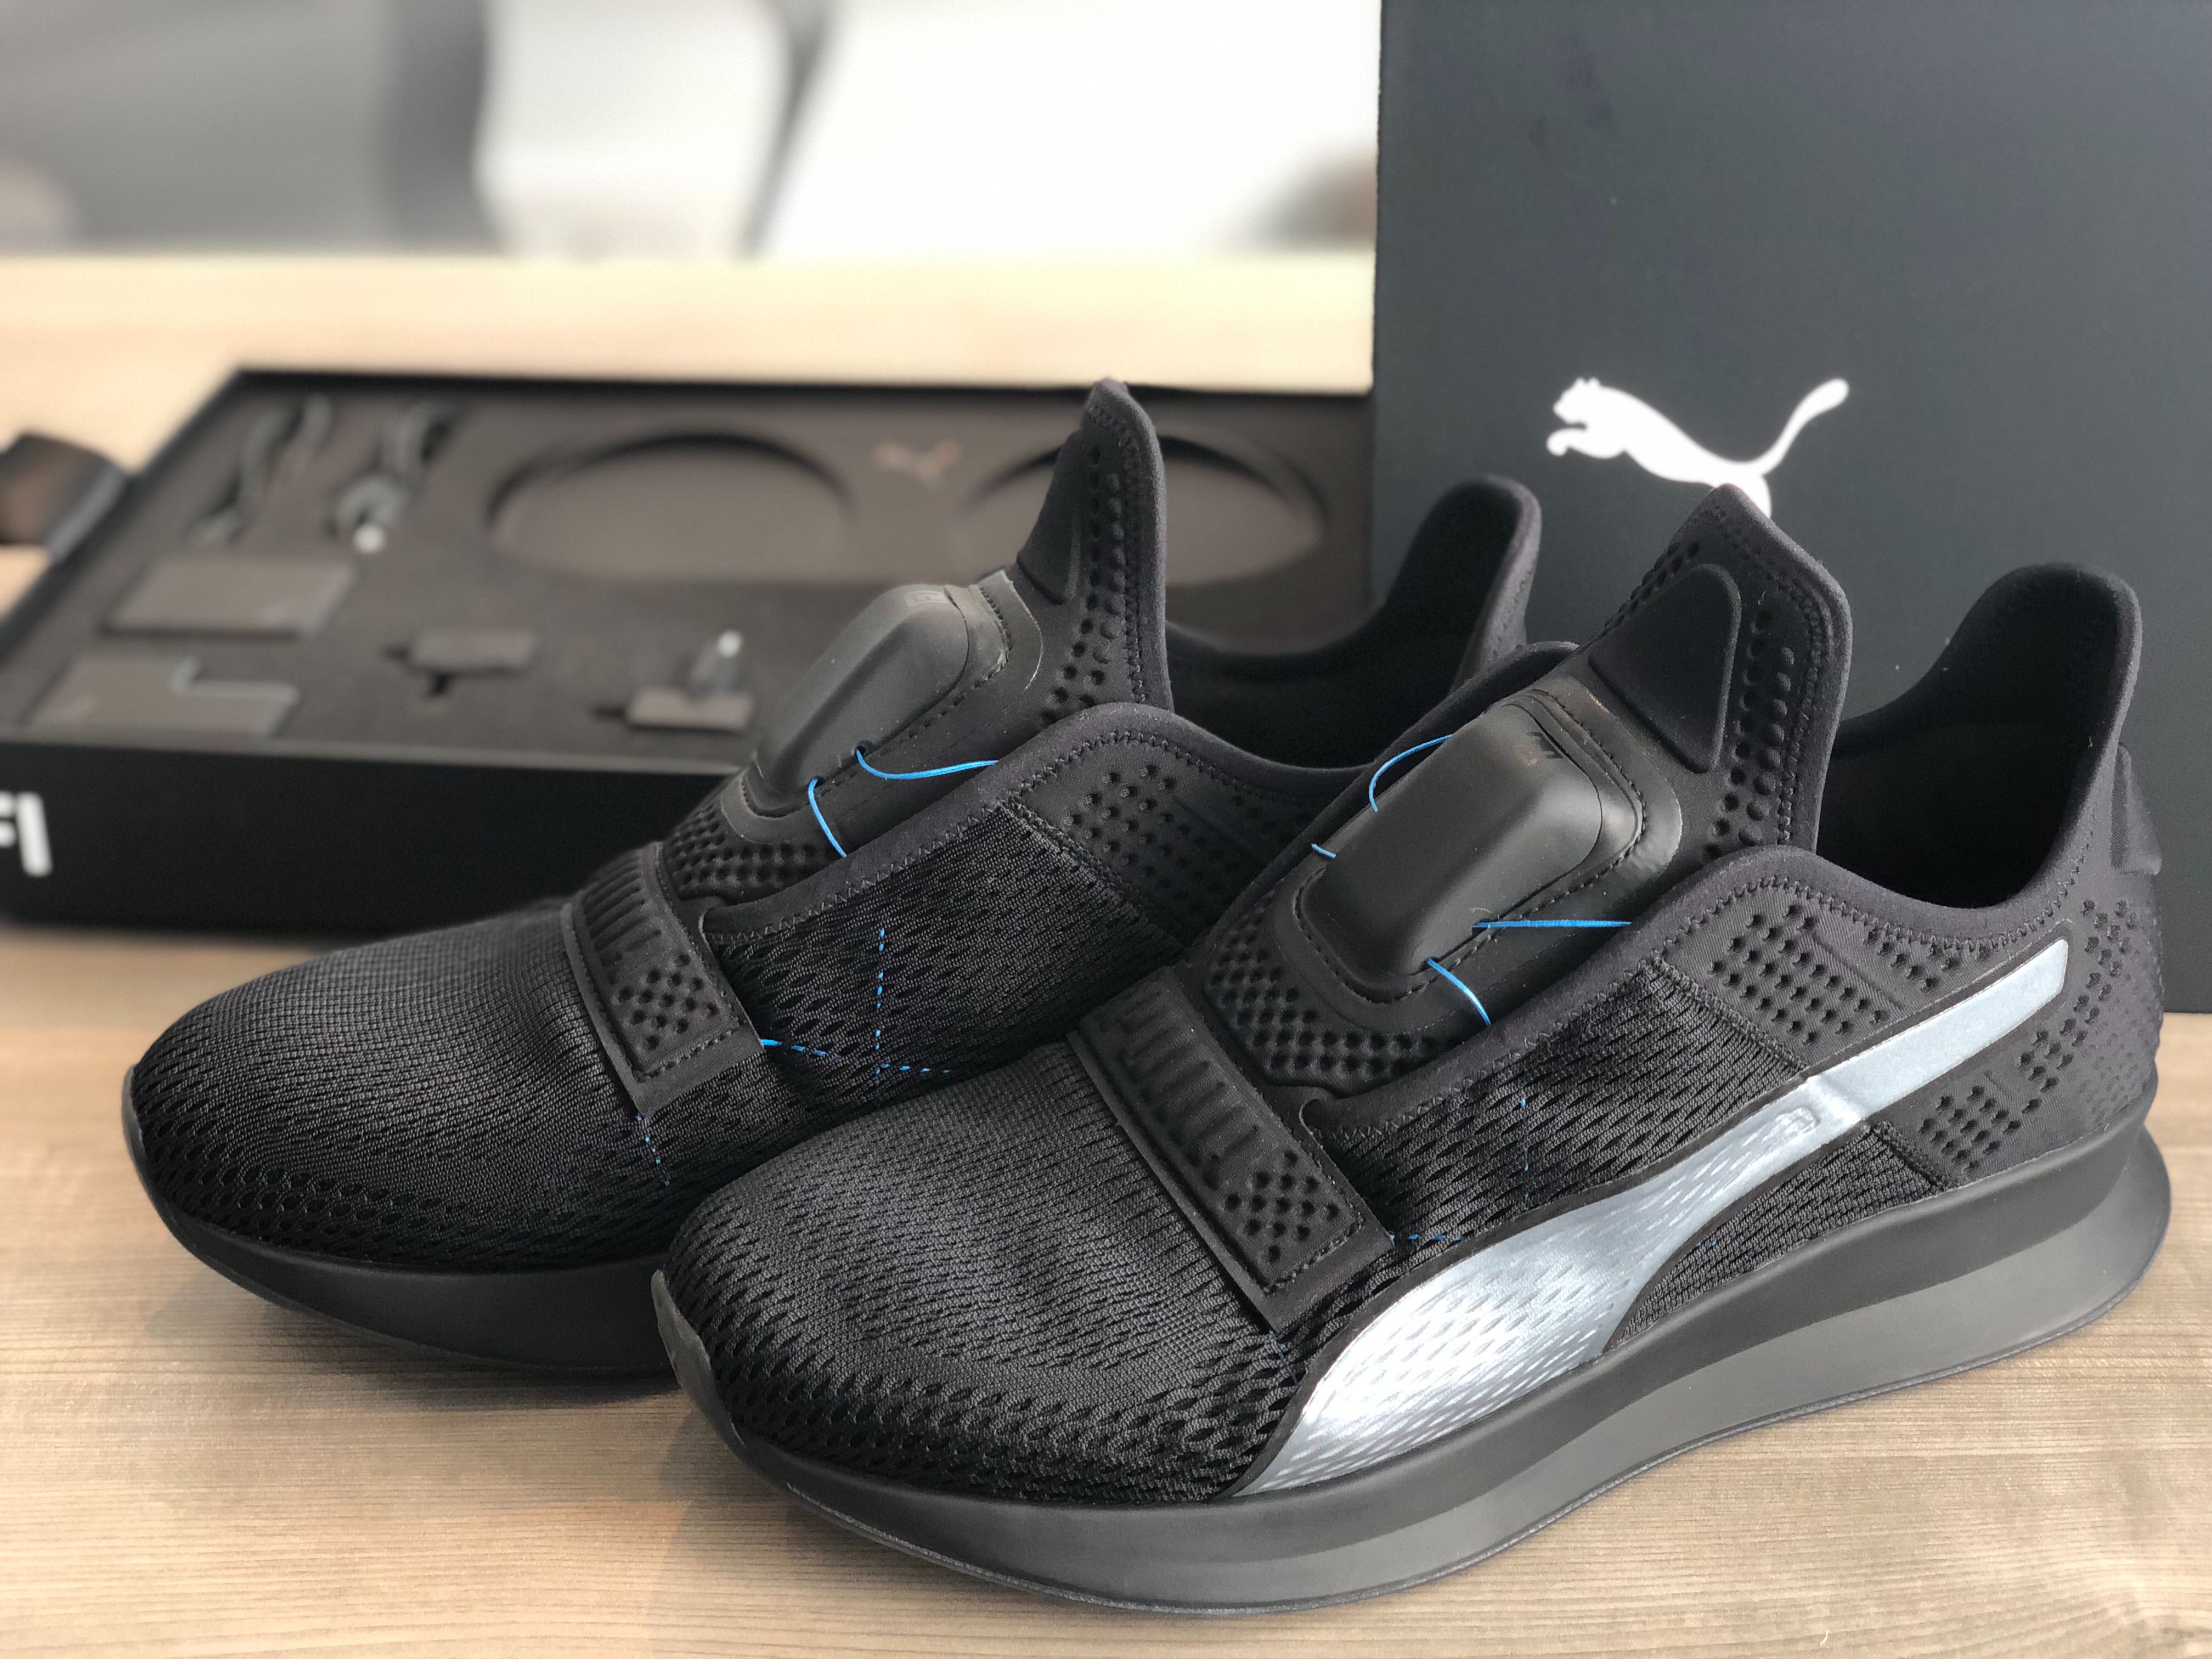 Puma to release self-lacing sneakers to 